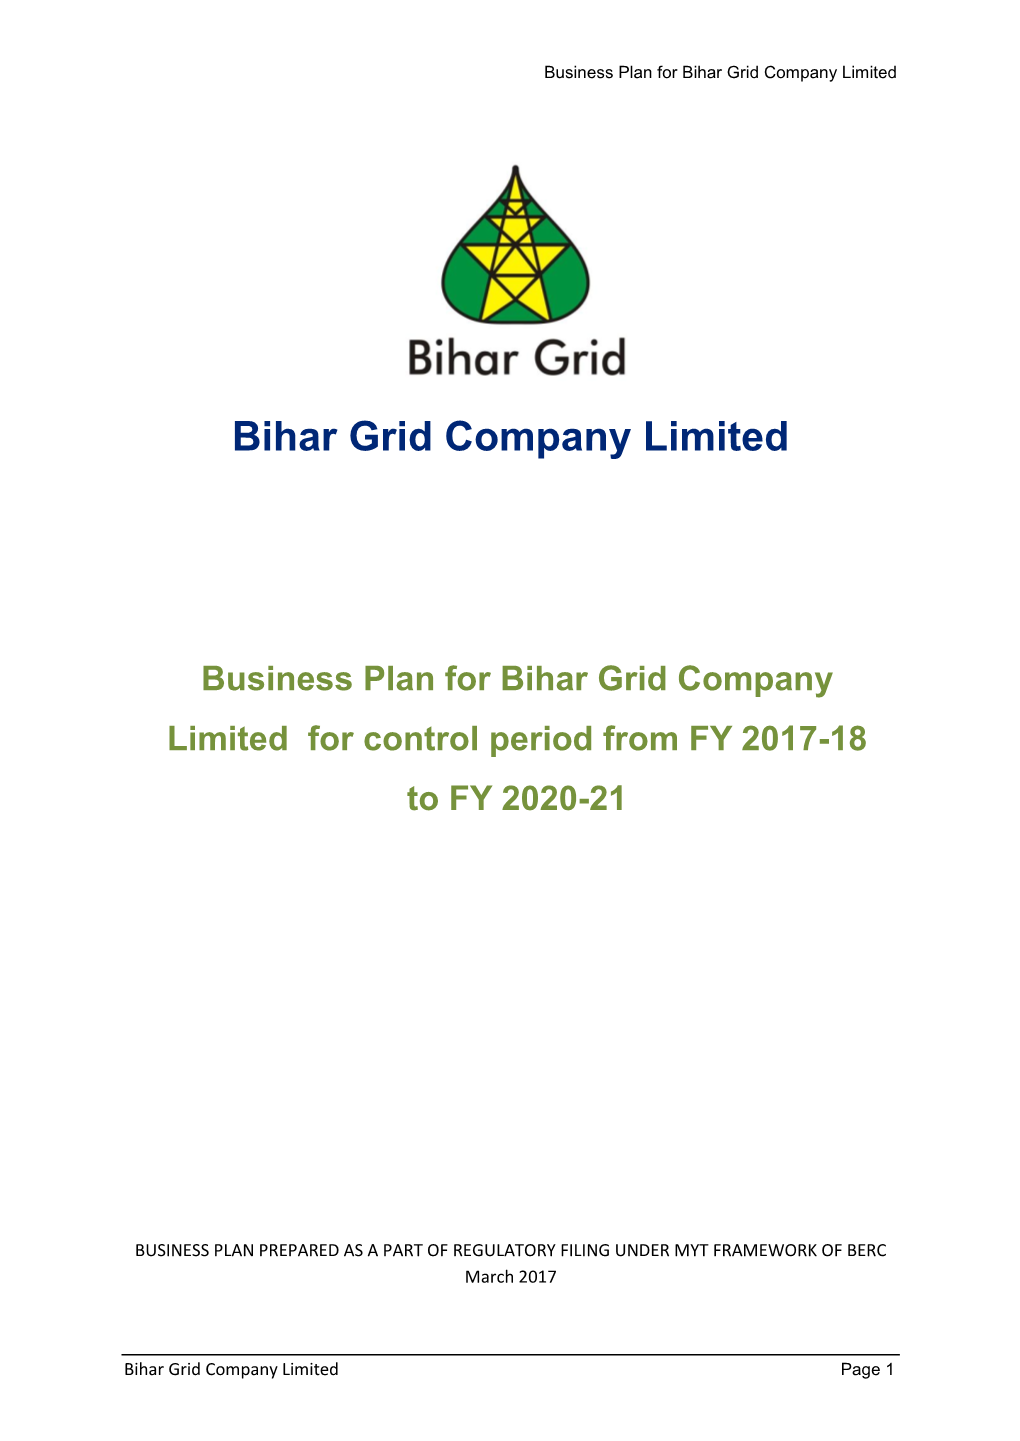 Business Plan for Bihar Grid Company Limited for Control Period from FY 2017-18 to FY 2020-21